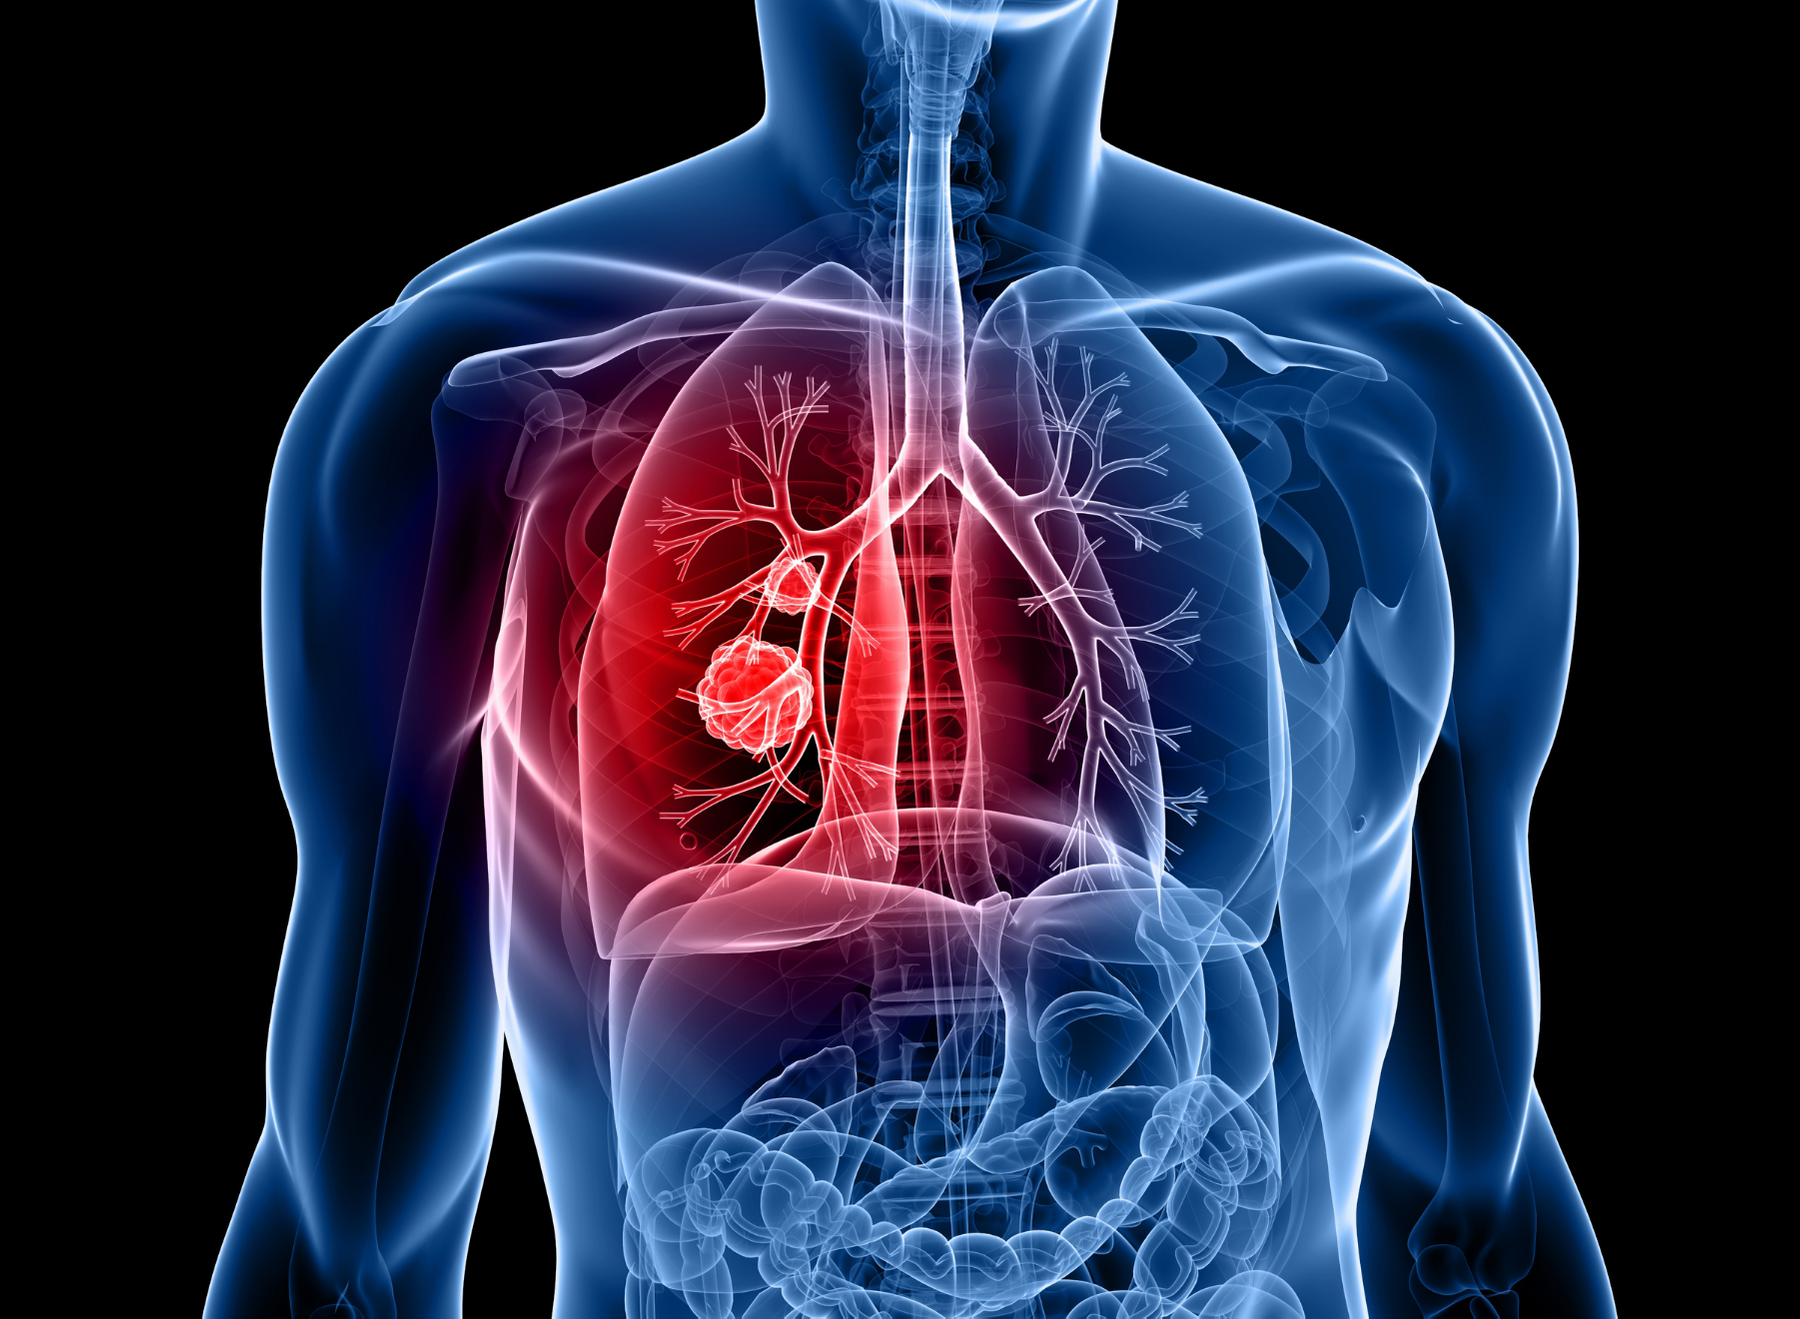 Immunotherapy-Induced Pneumonitis Common in Patients With NSCLC